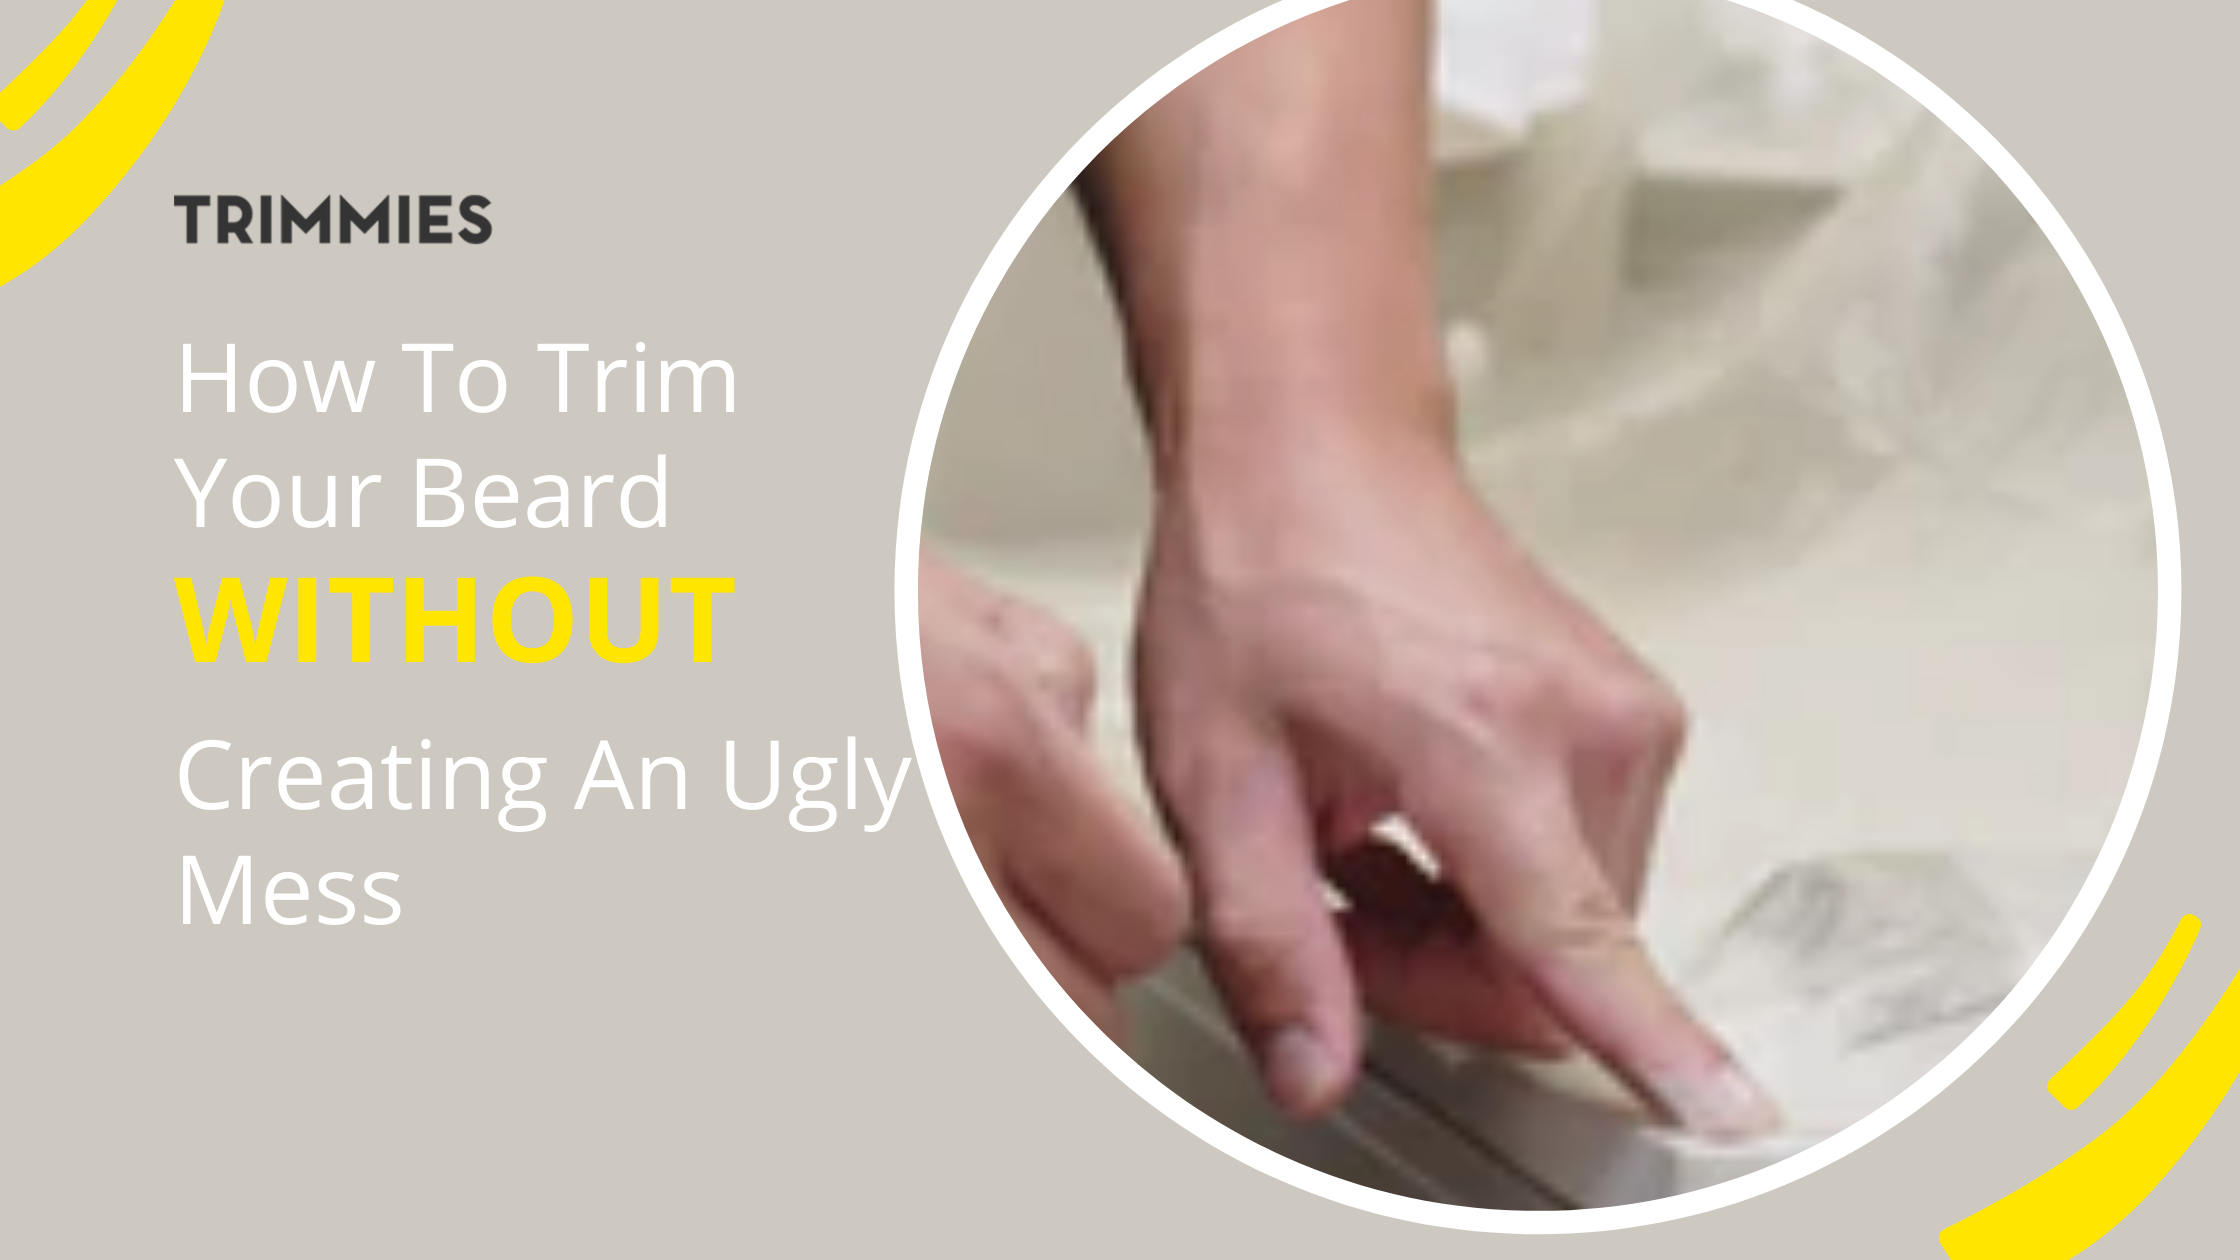 Disposable Beard Trimming Liners- Let's Not Make Mess – Trimmies LLC